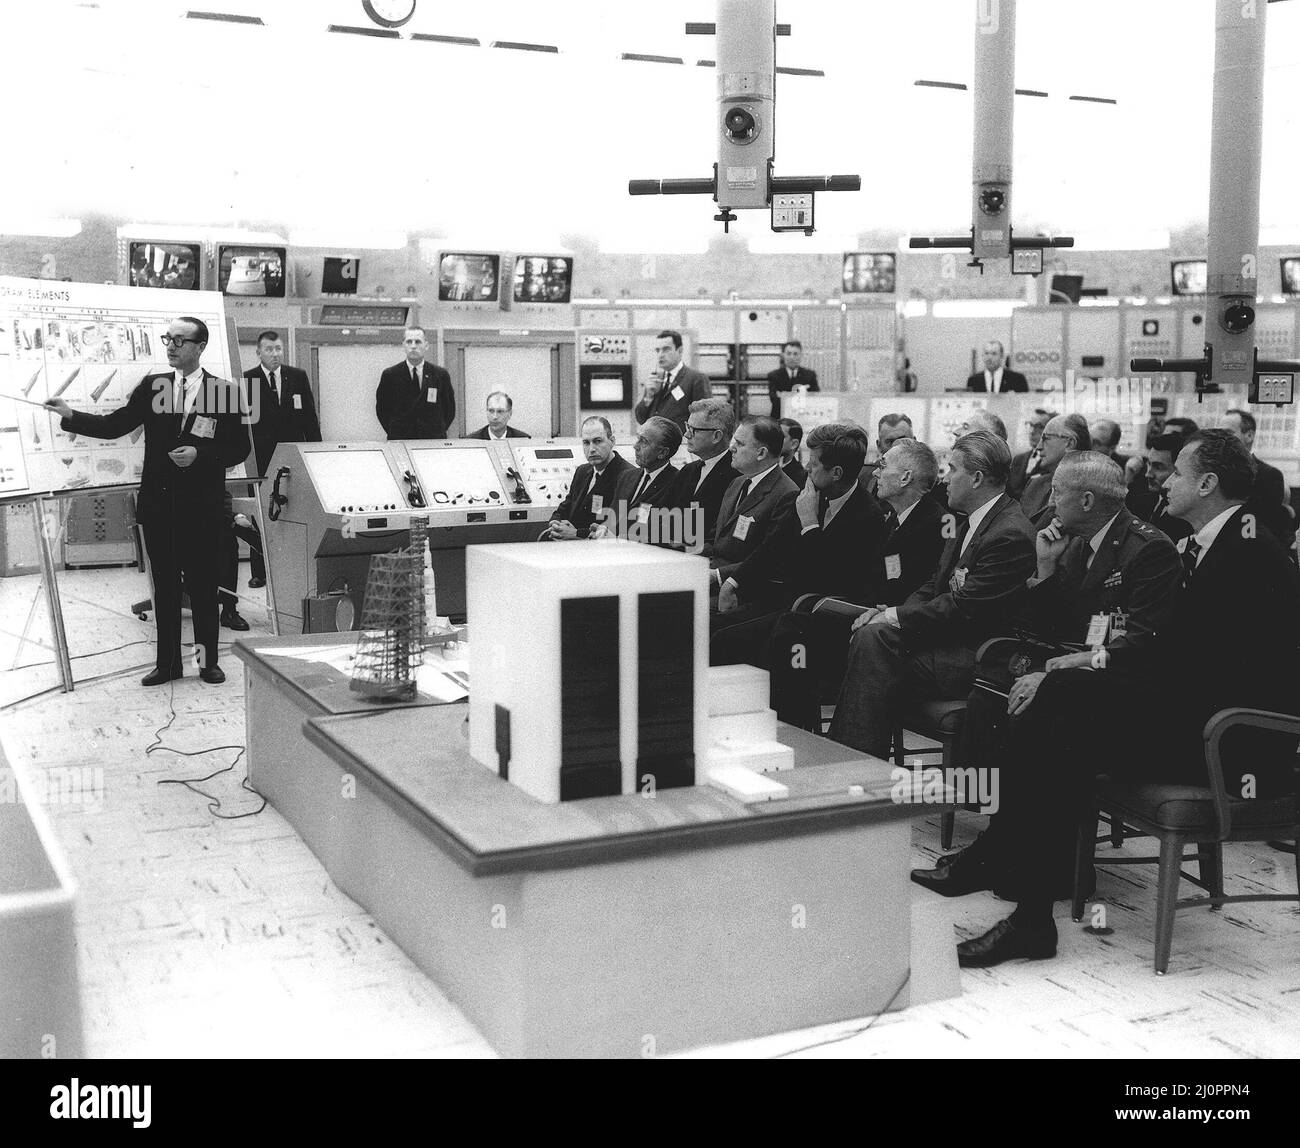 Dr. George Mueller gives Saturn V orientation to President John F. Kennedy and officals in Blockhouse 37. Front row, left to right: George Low, Dr. Kurt Debus, Dr. Robert Seamans, James Webb, President Kennedy, Dr. Hugh Dryden, Dr. Wernher von Braun, General Leighten Davis, and Senator George Smathers. Stock Photo